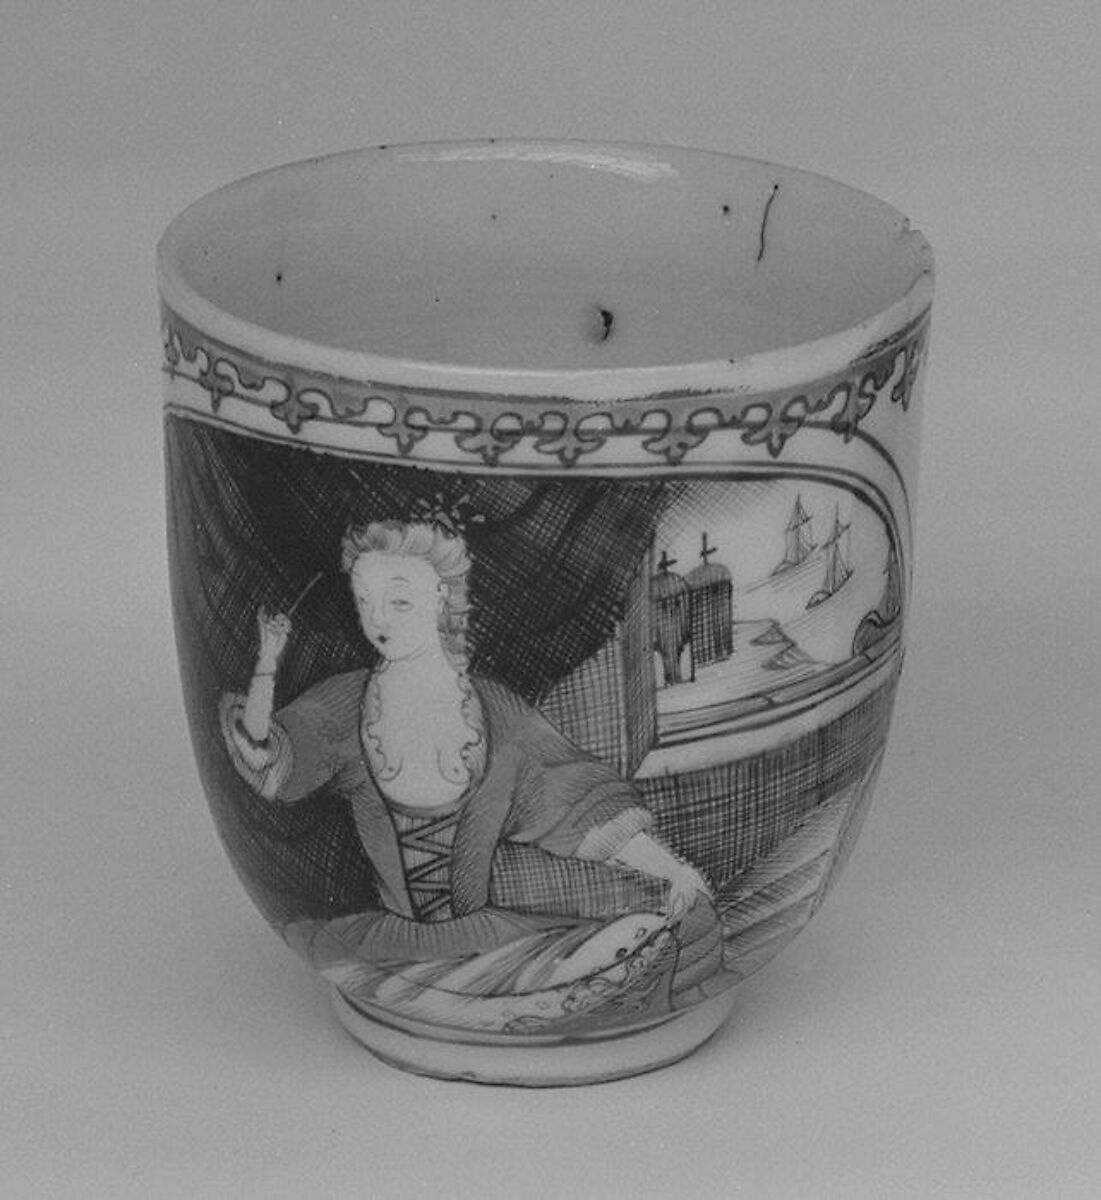 a of (part The | Metropolitan possibly Museum service) Chinese, Art Dutch Cup of | for market